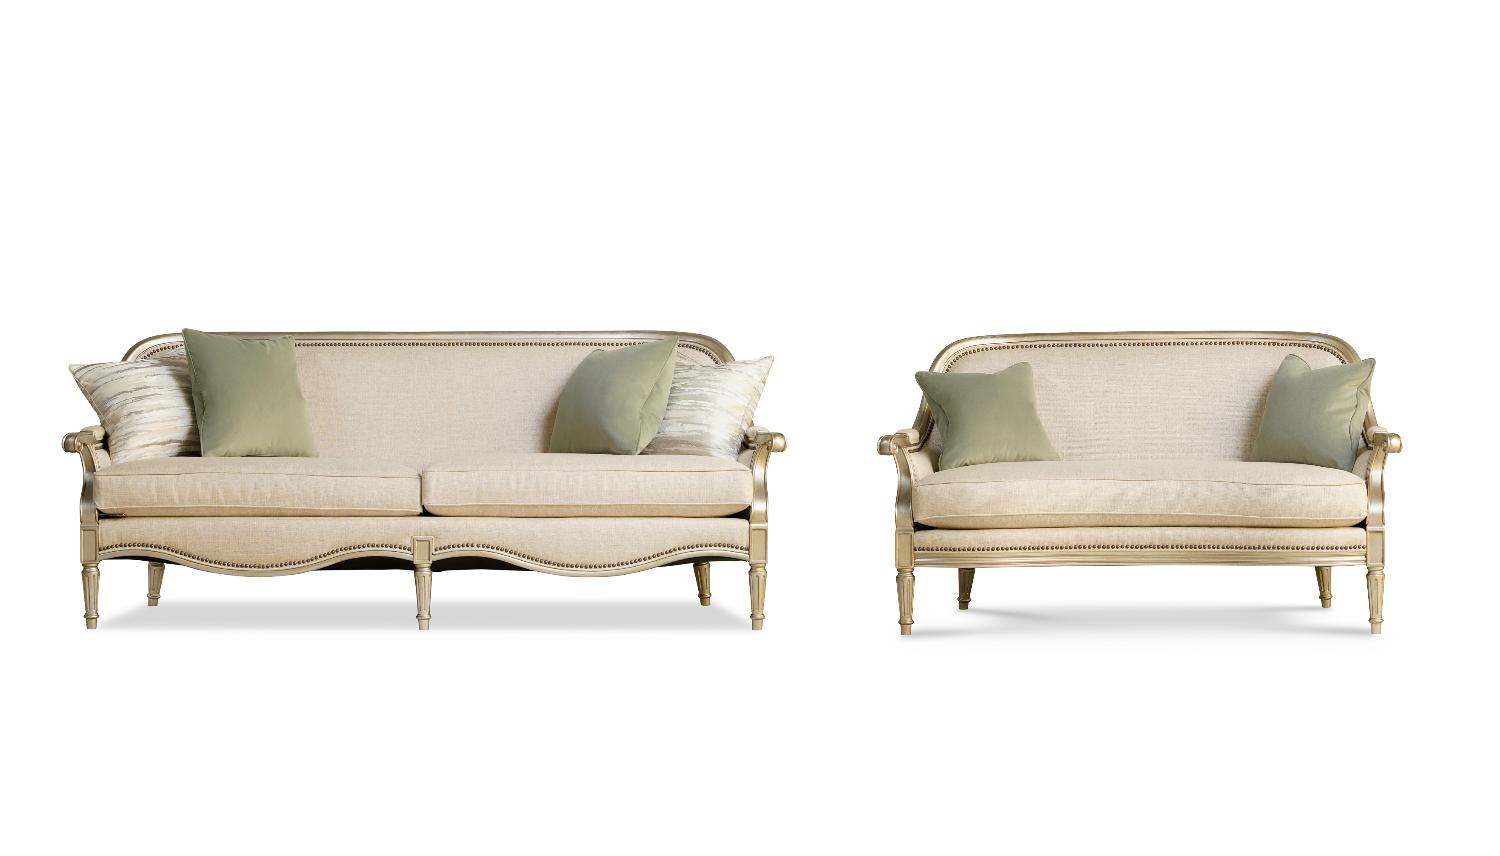 Contemporary, Modern Sofa and Loveseat Set Charlotte Emerald 176541-5227AA-2pcs in Beige Fabric